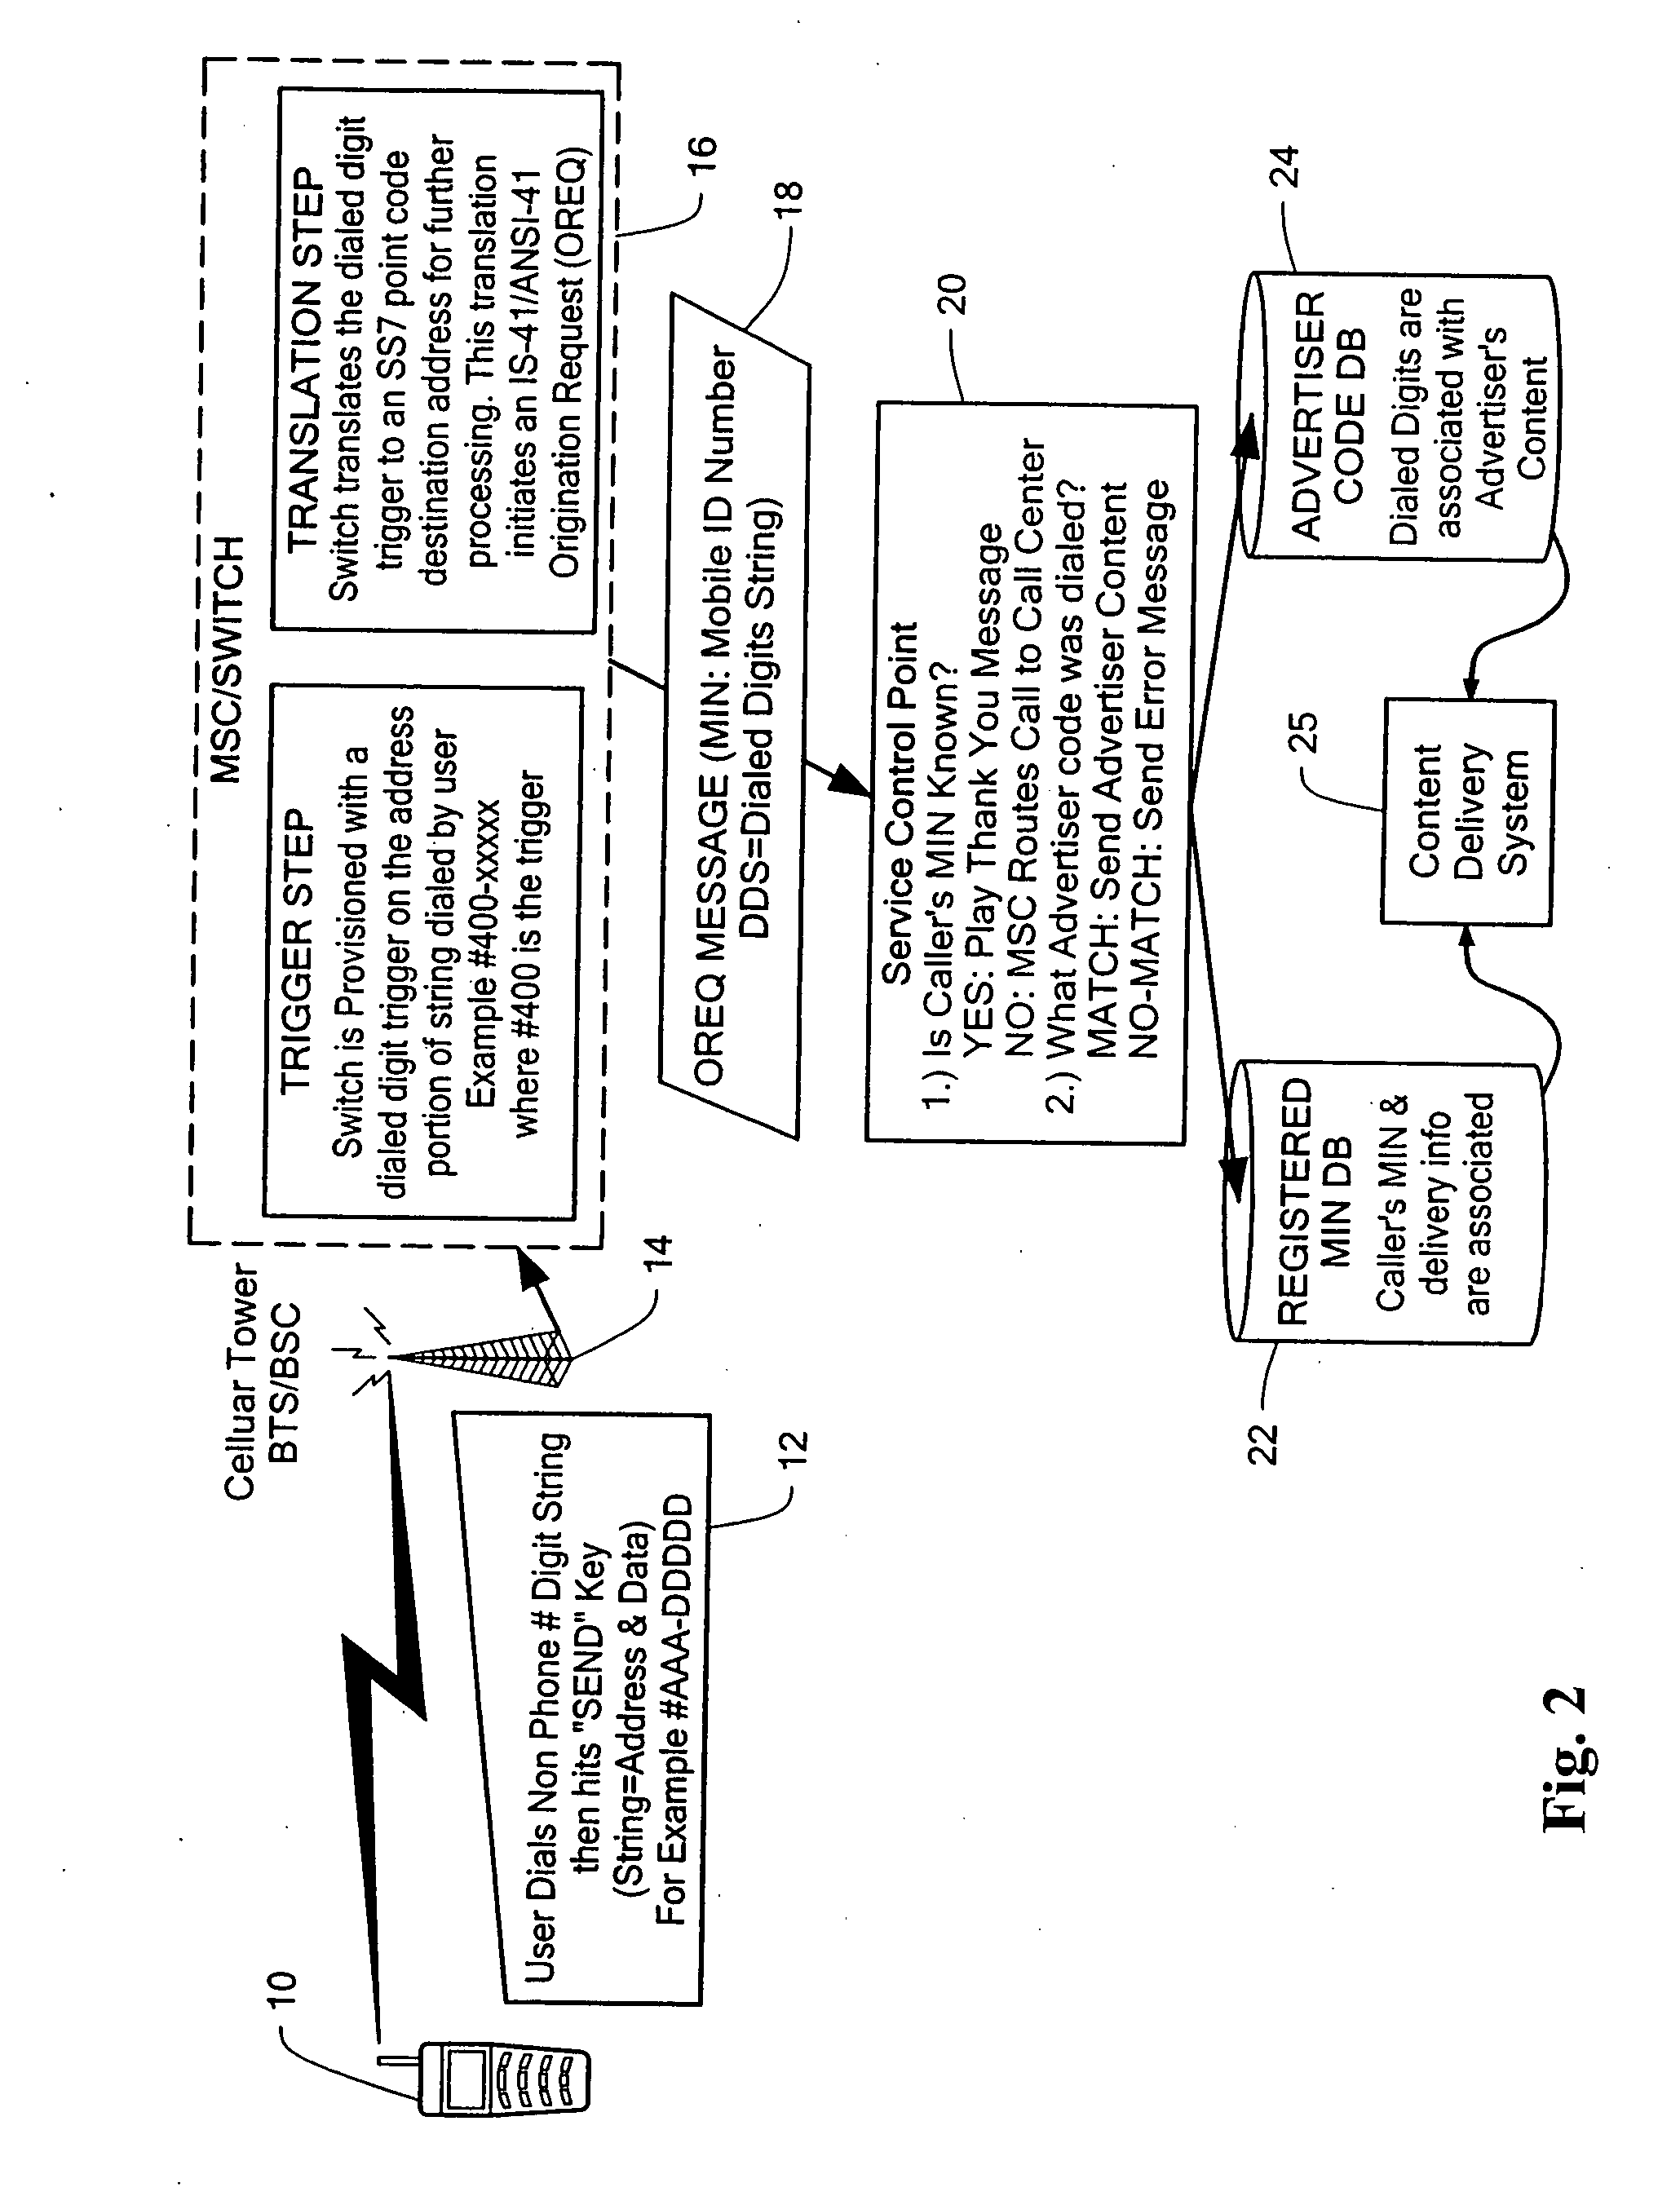 System and method for service invocation and response with a communication device